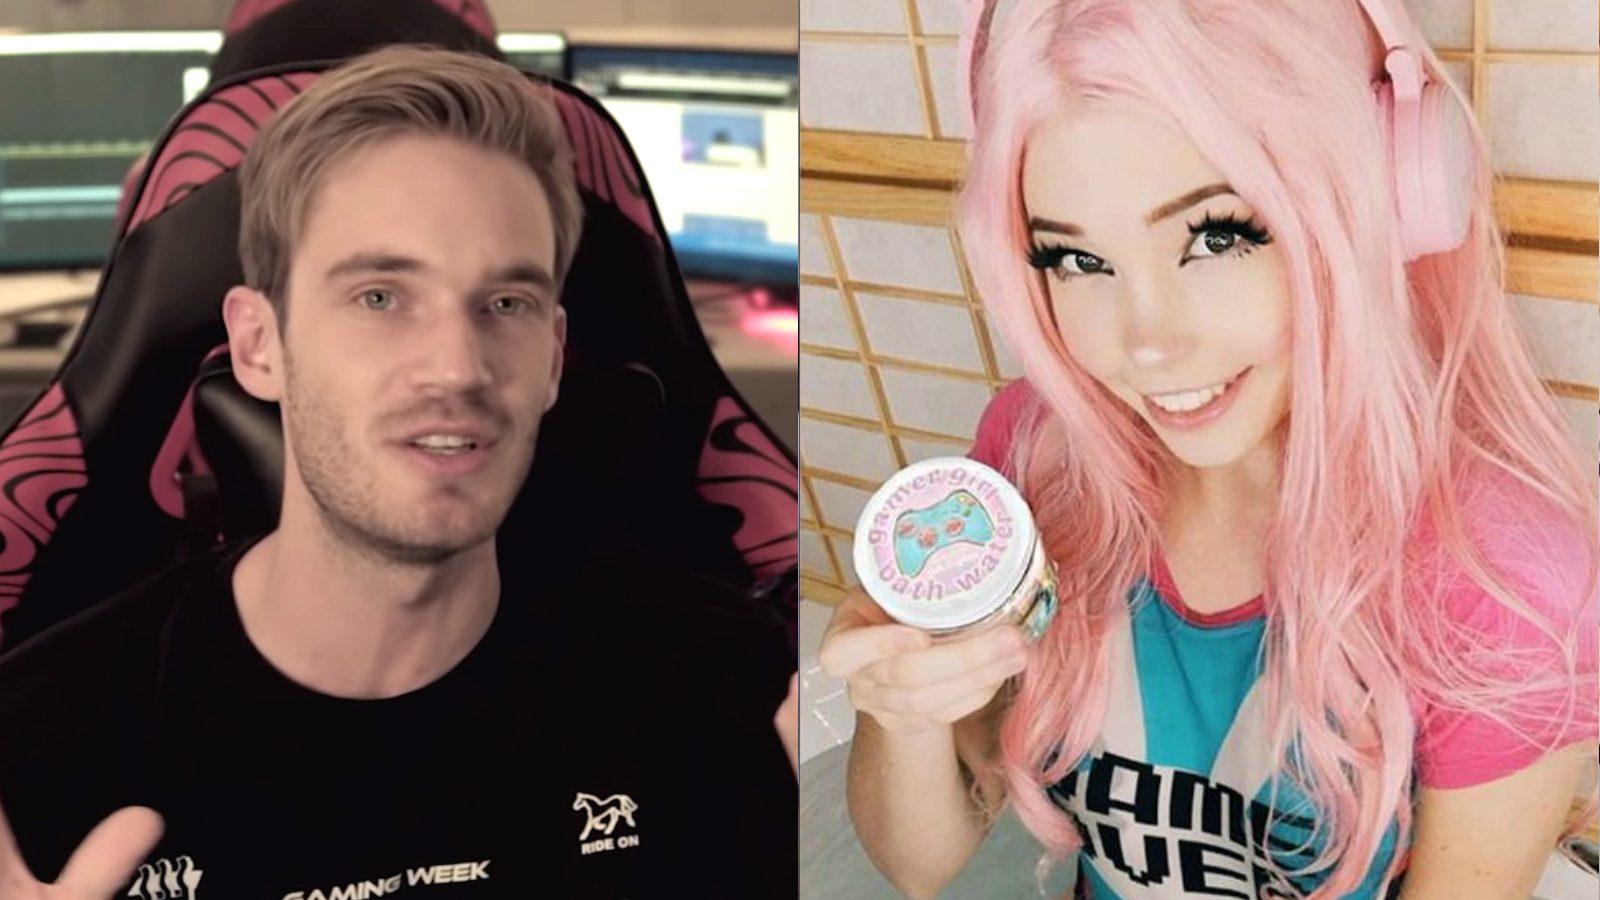 Belle Delphine, Cosplay Model Who Went Viral For Selling Bathwater